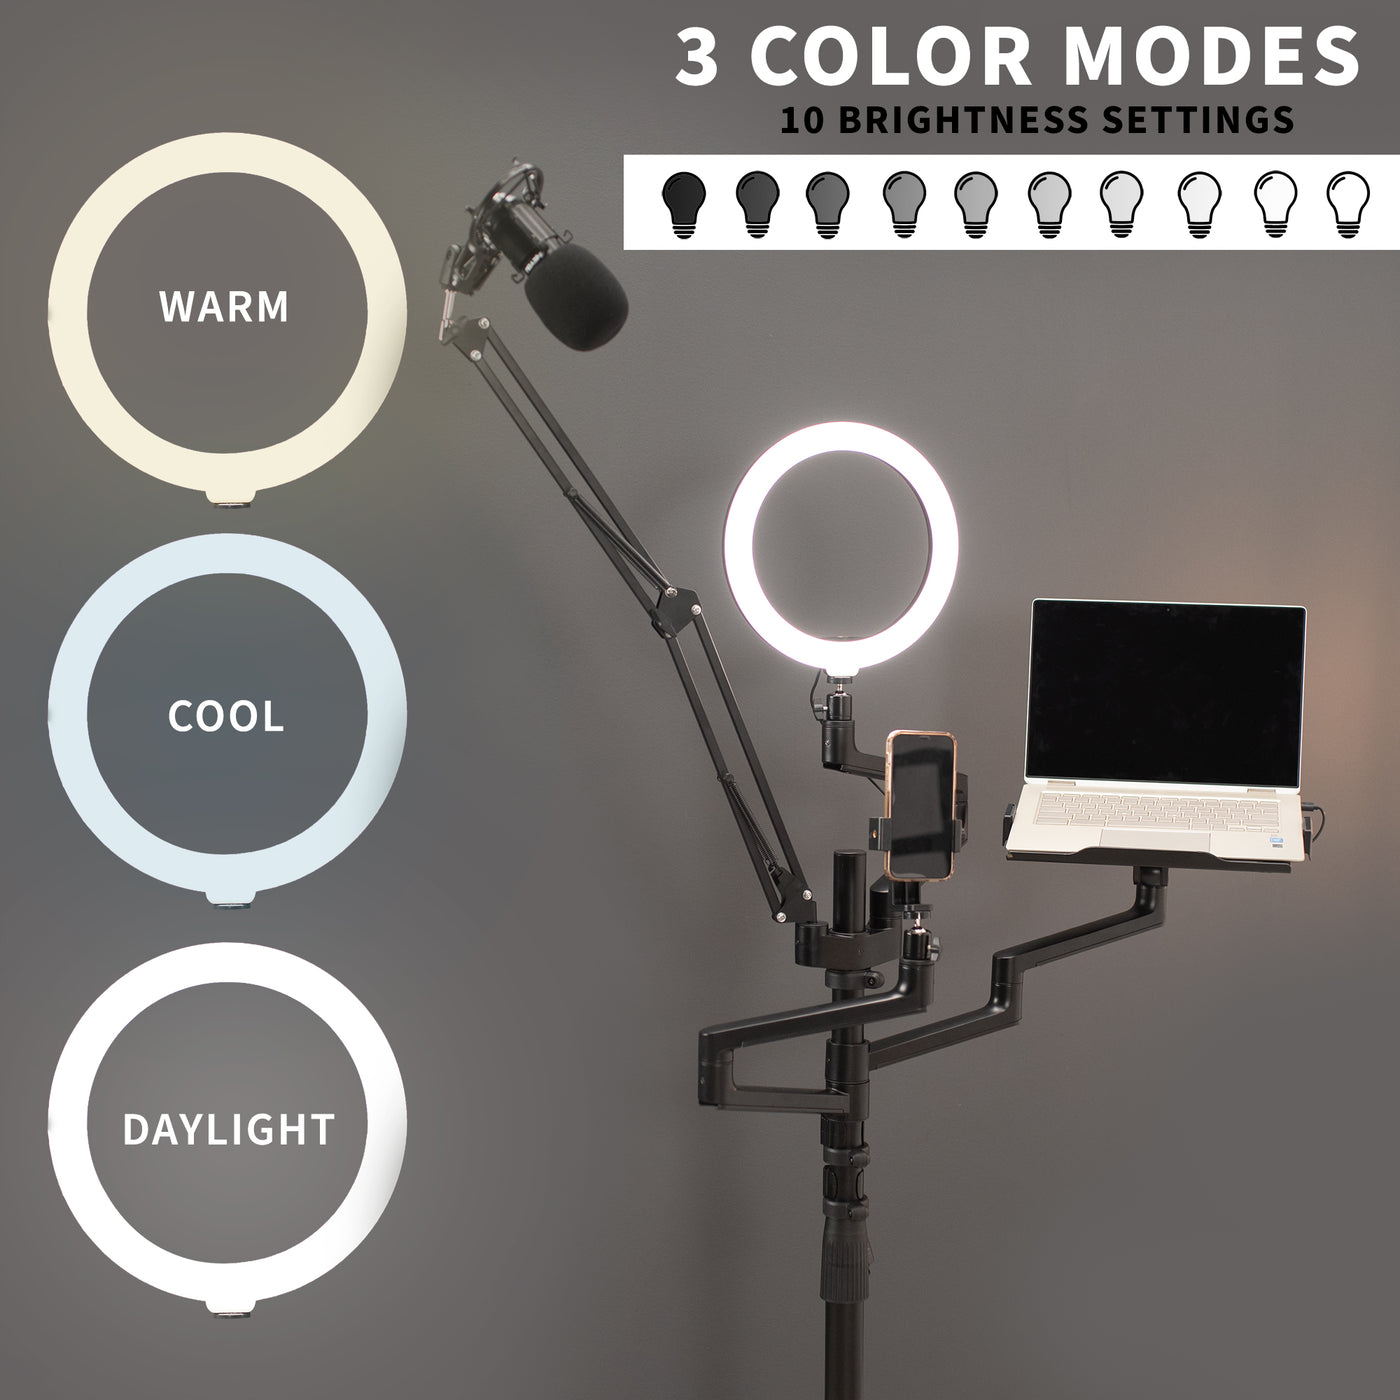 Led ring light has three lighting settings including warm, cool, and daylight, with ten brightness settings.